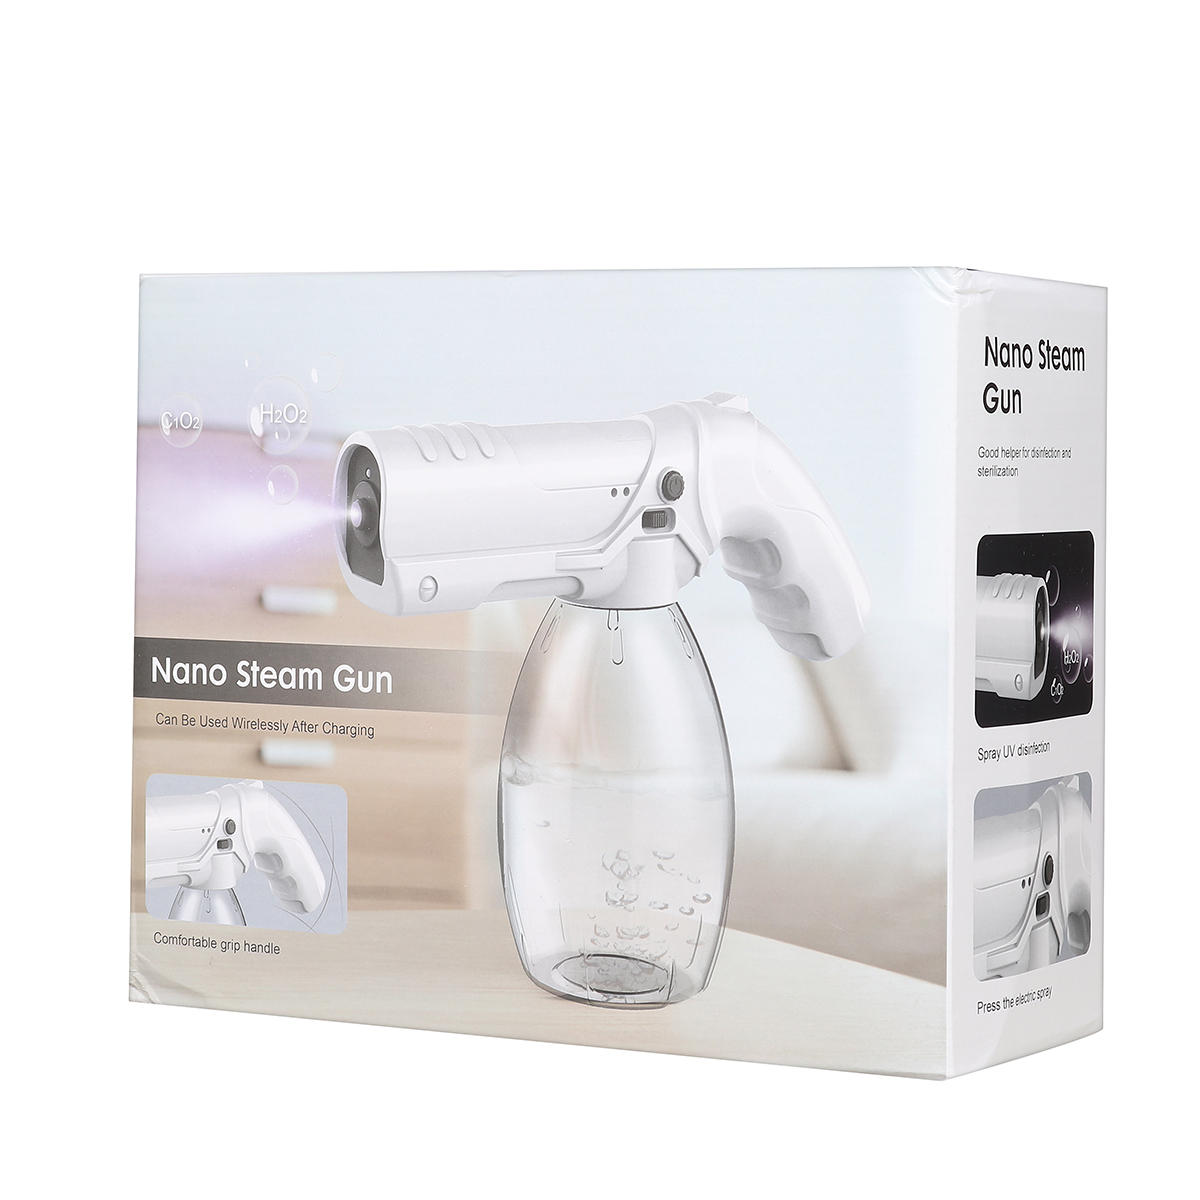 800ML-Electric-Spray-Guns-Atomization-Disinfection-Guns-Wireless-USB-Rechargeable-Alcohol-Household--1896534-10